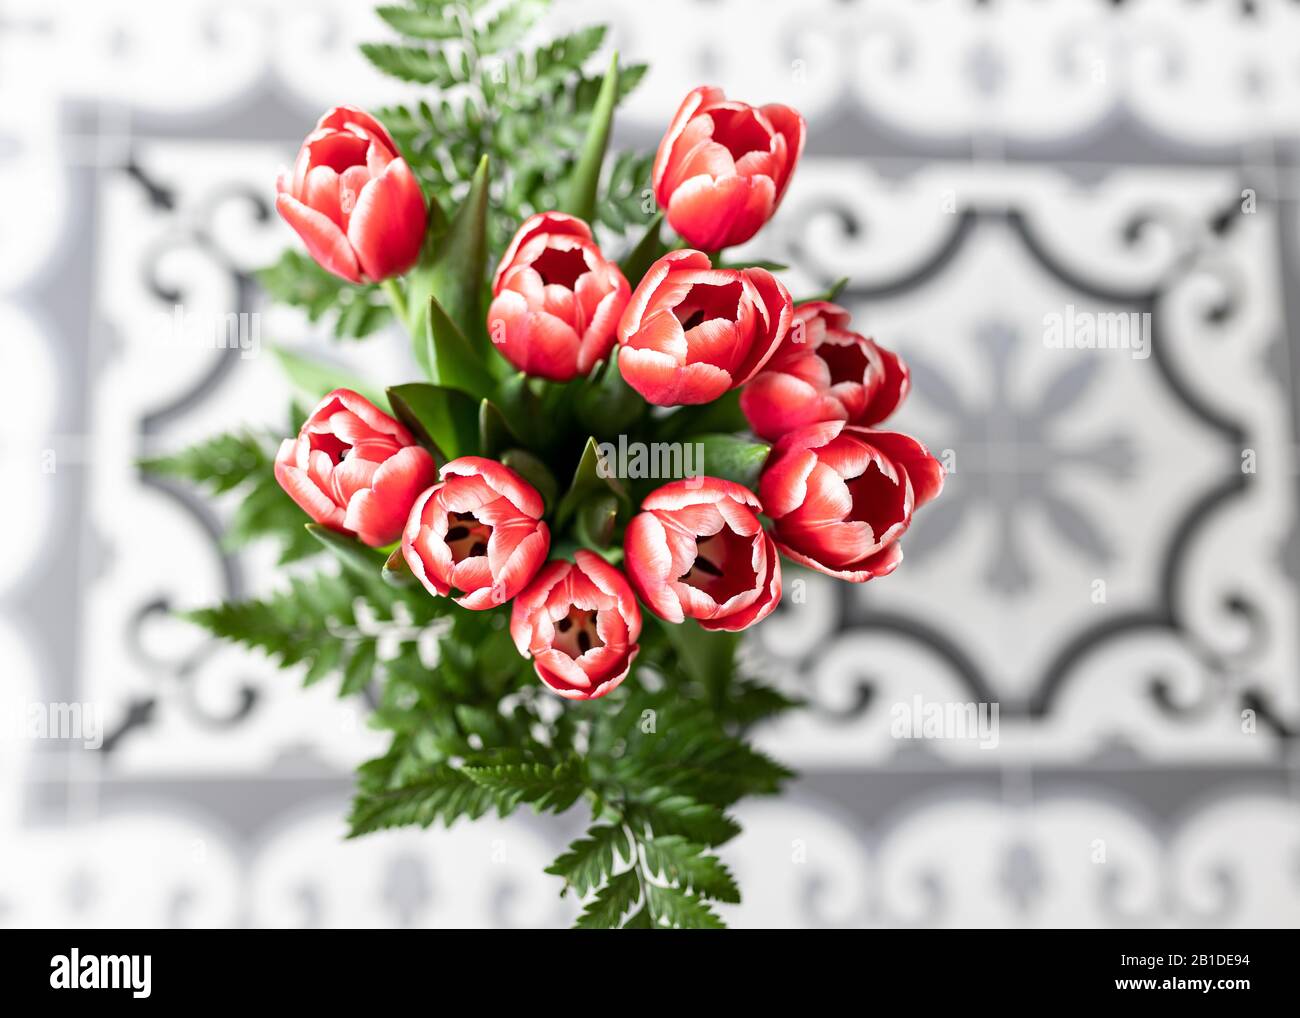 Overhead view of a red, white edges tulips bouquet on a hydraulic background. Stock Photo